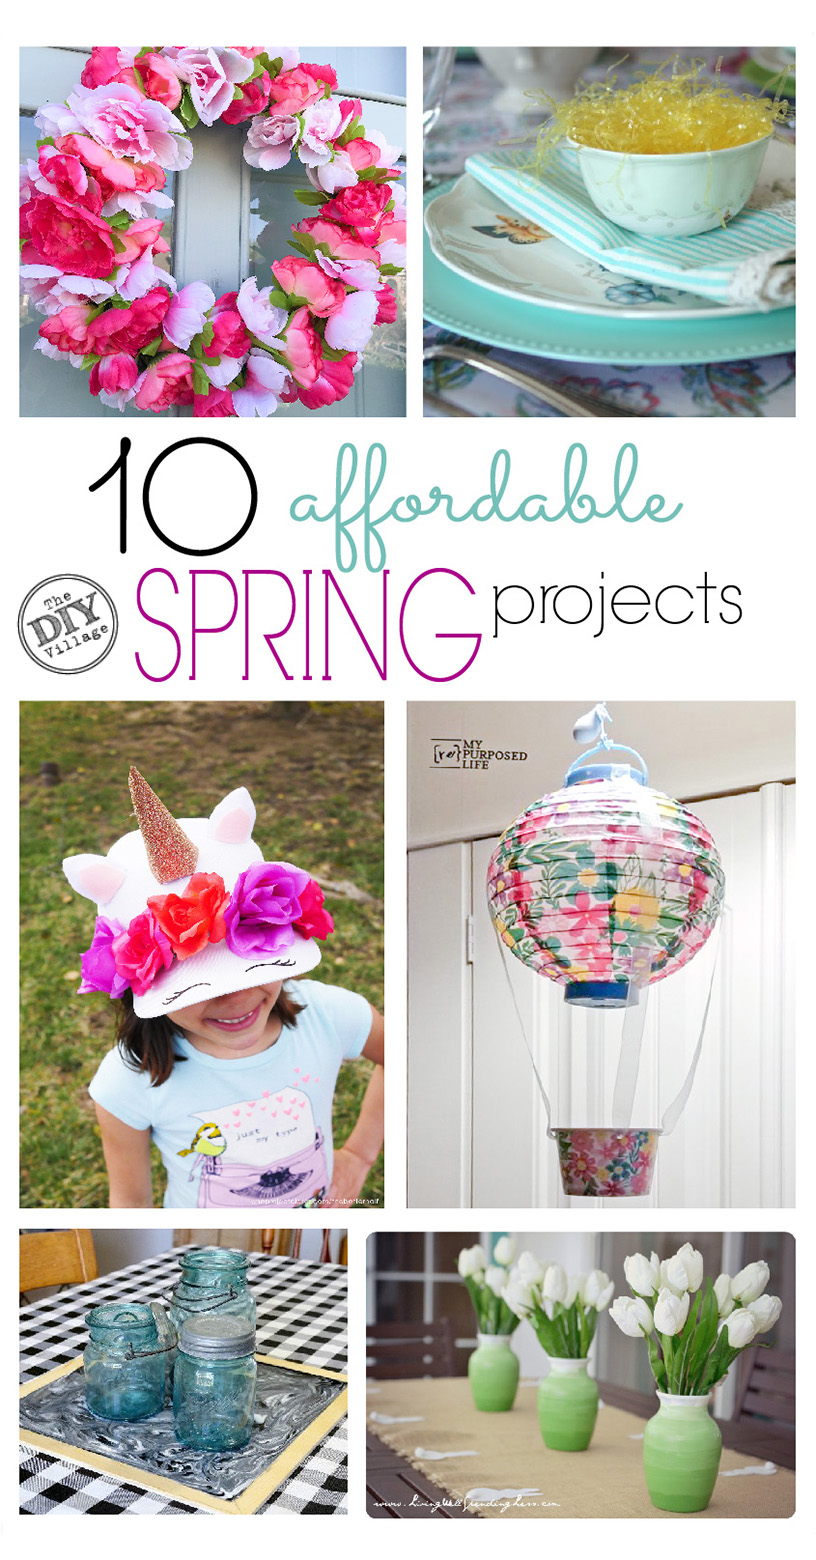  10 Affordable Spring Projects from the Dollar Store Crafts #unicorn #crafts #diy #dollarstore #inspiration #spring #hotairballoon #wreath #masonjars #tablescape #organization #storage